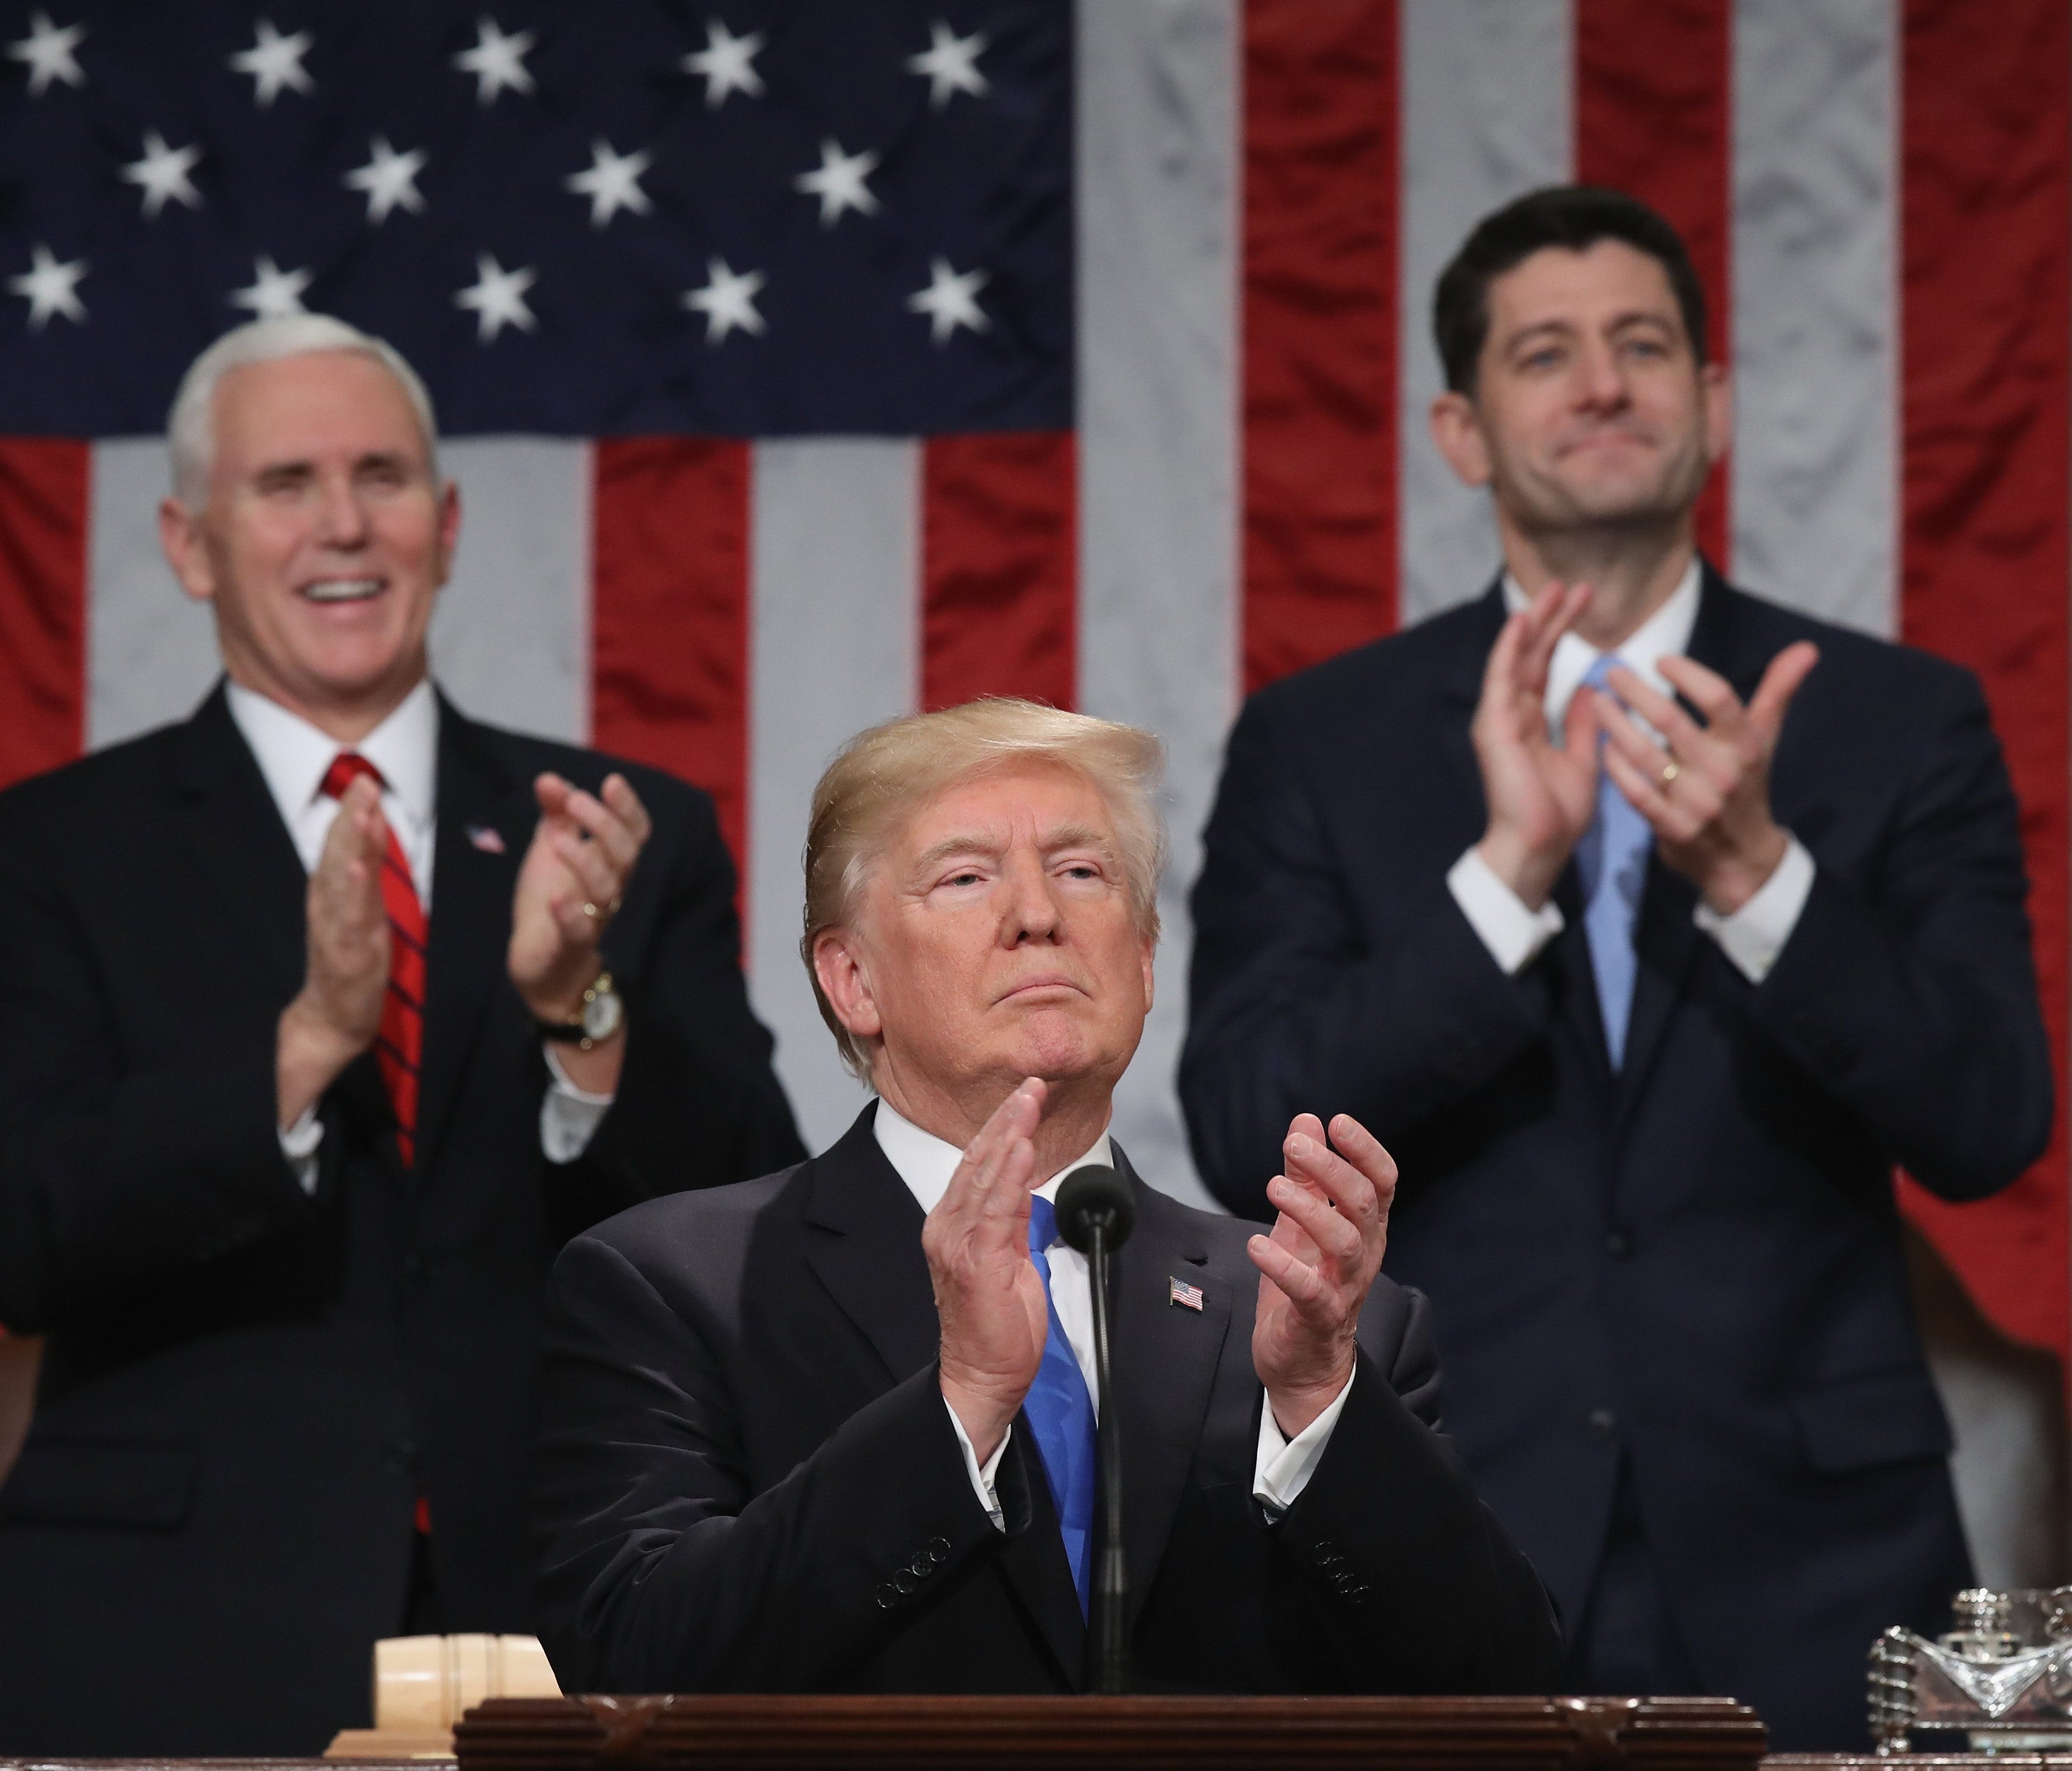 President Donald J. Trump claps during the State of the Union address Jan. 30, 2018. This is the first State of the Union address given by US President Donald J. Trump and his second joint-session address to Congress.  EPA-EFE/WIN MCNAMEE / POOL ORG 